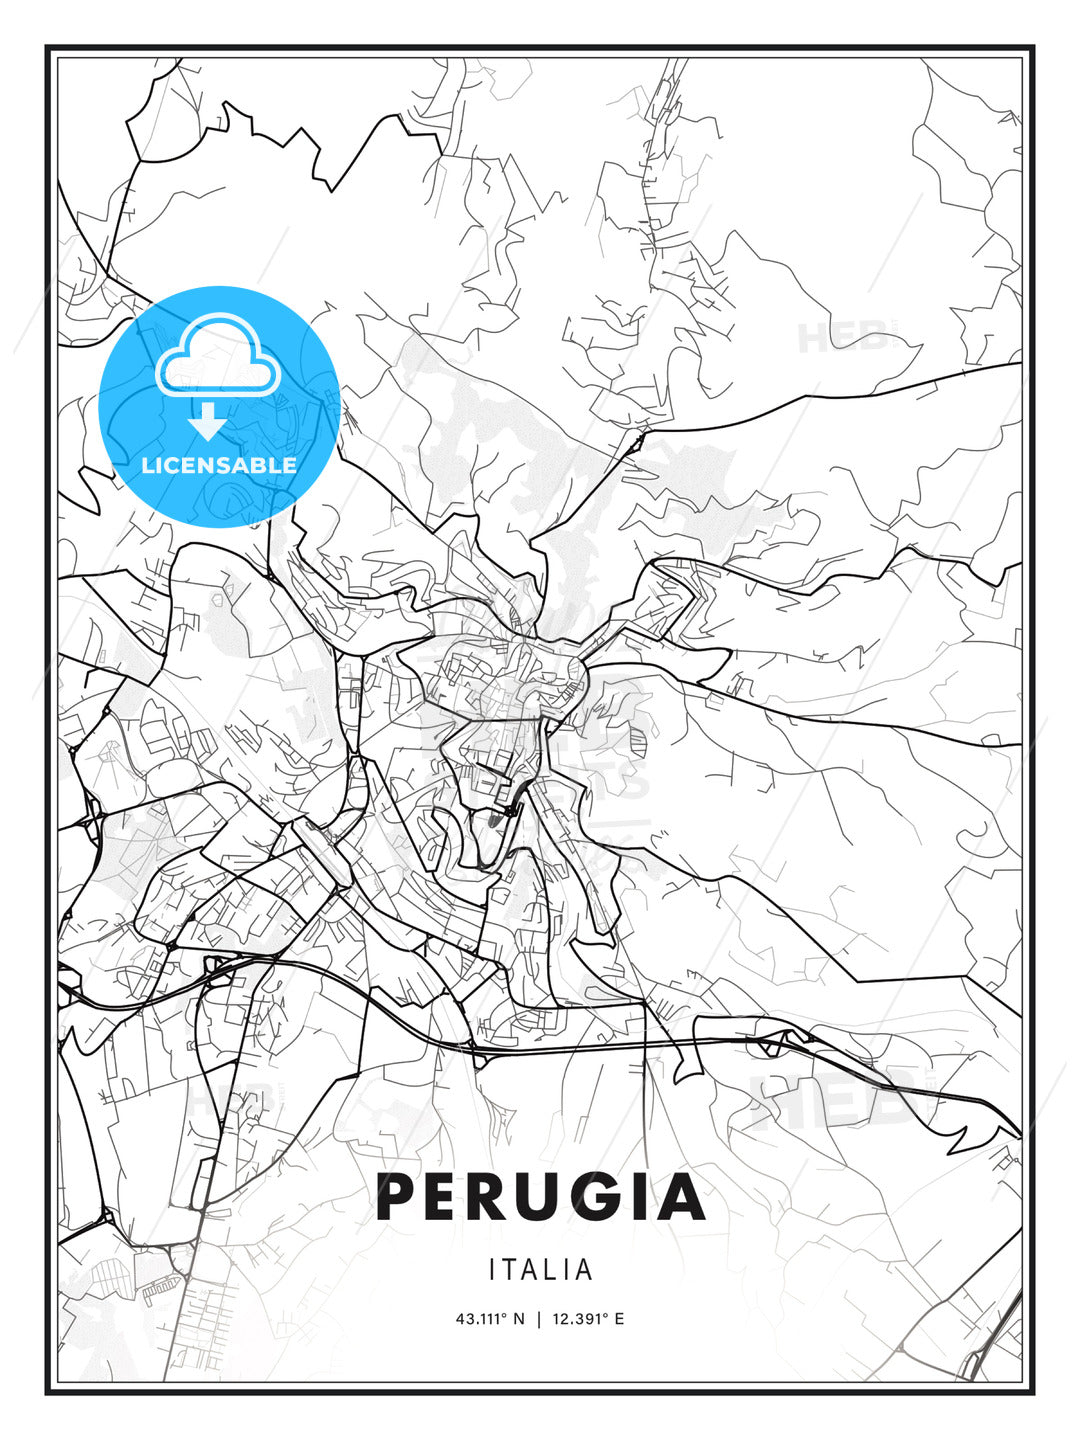 Perugia, Italy, Modern Print Template in Various Formats - HEBSTREITS Sketches